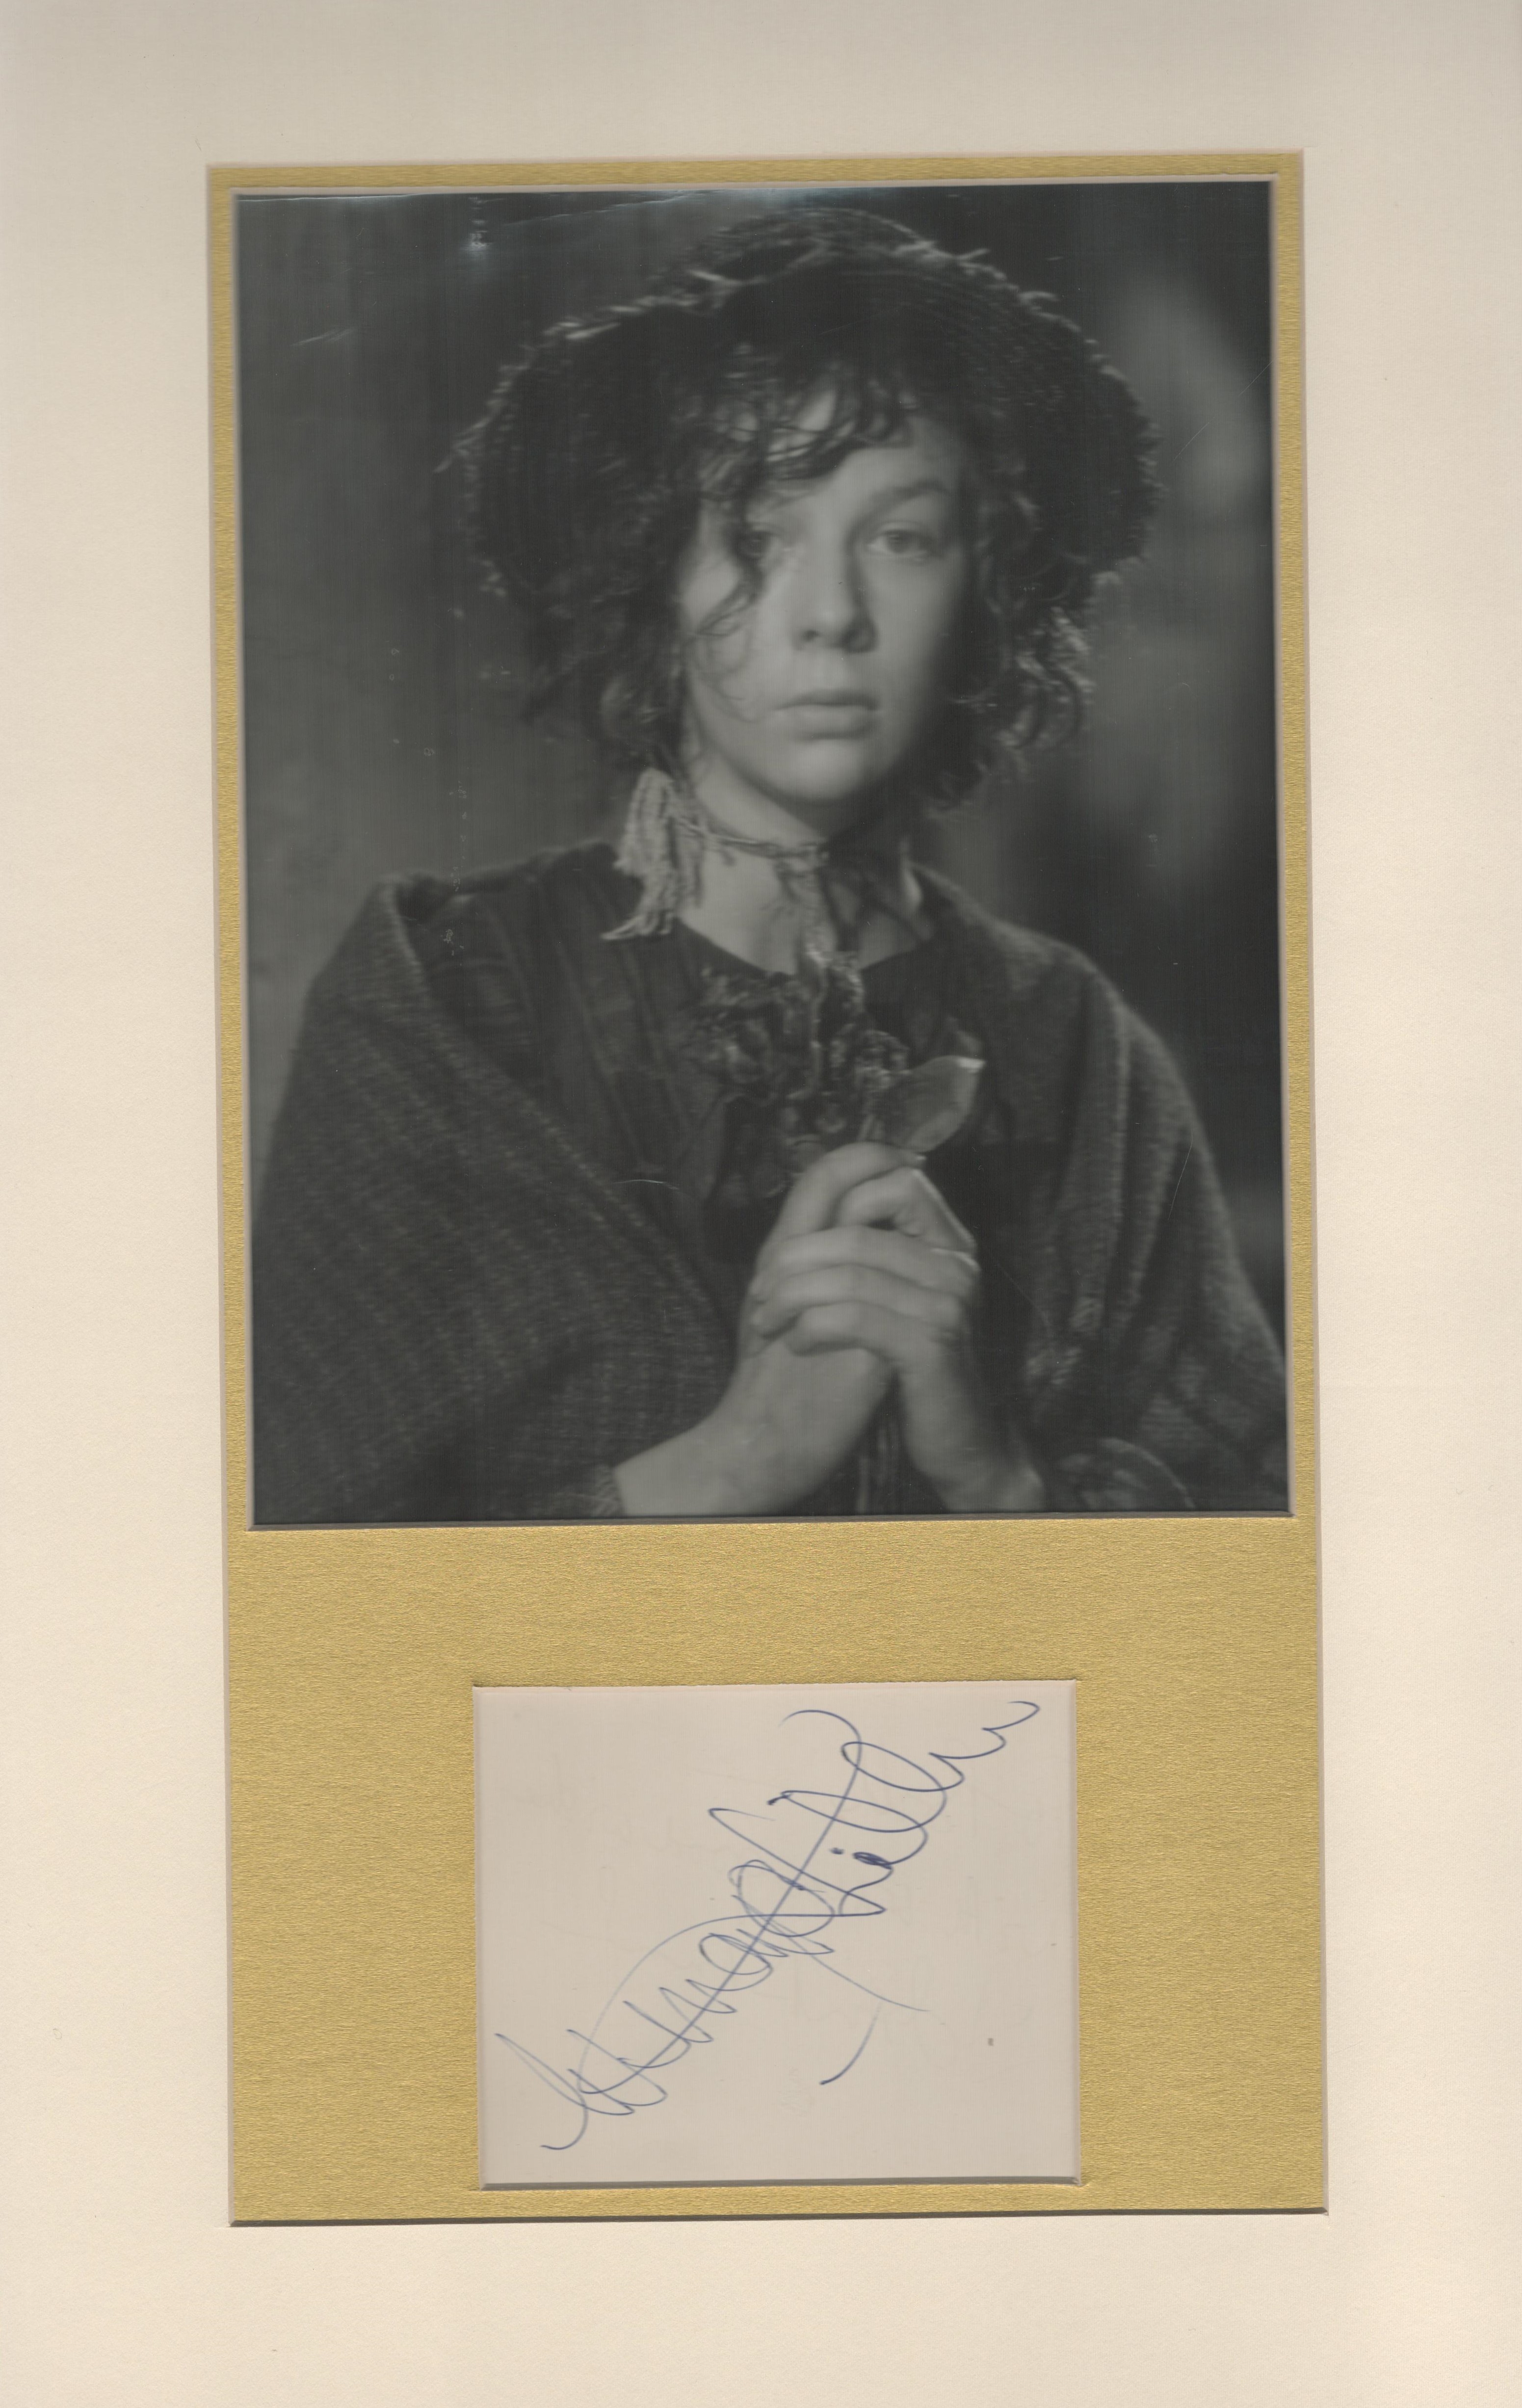 Wendy Hiller 17x11 overall mounted signature piece includes vintage black and white photo and signed